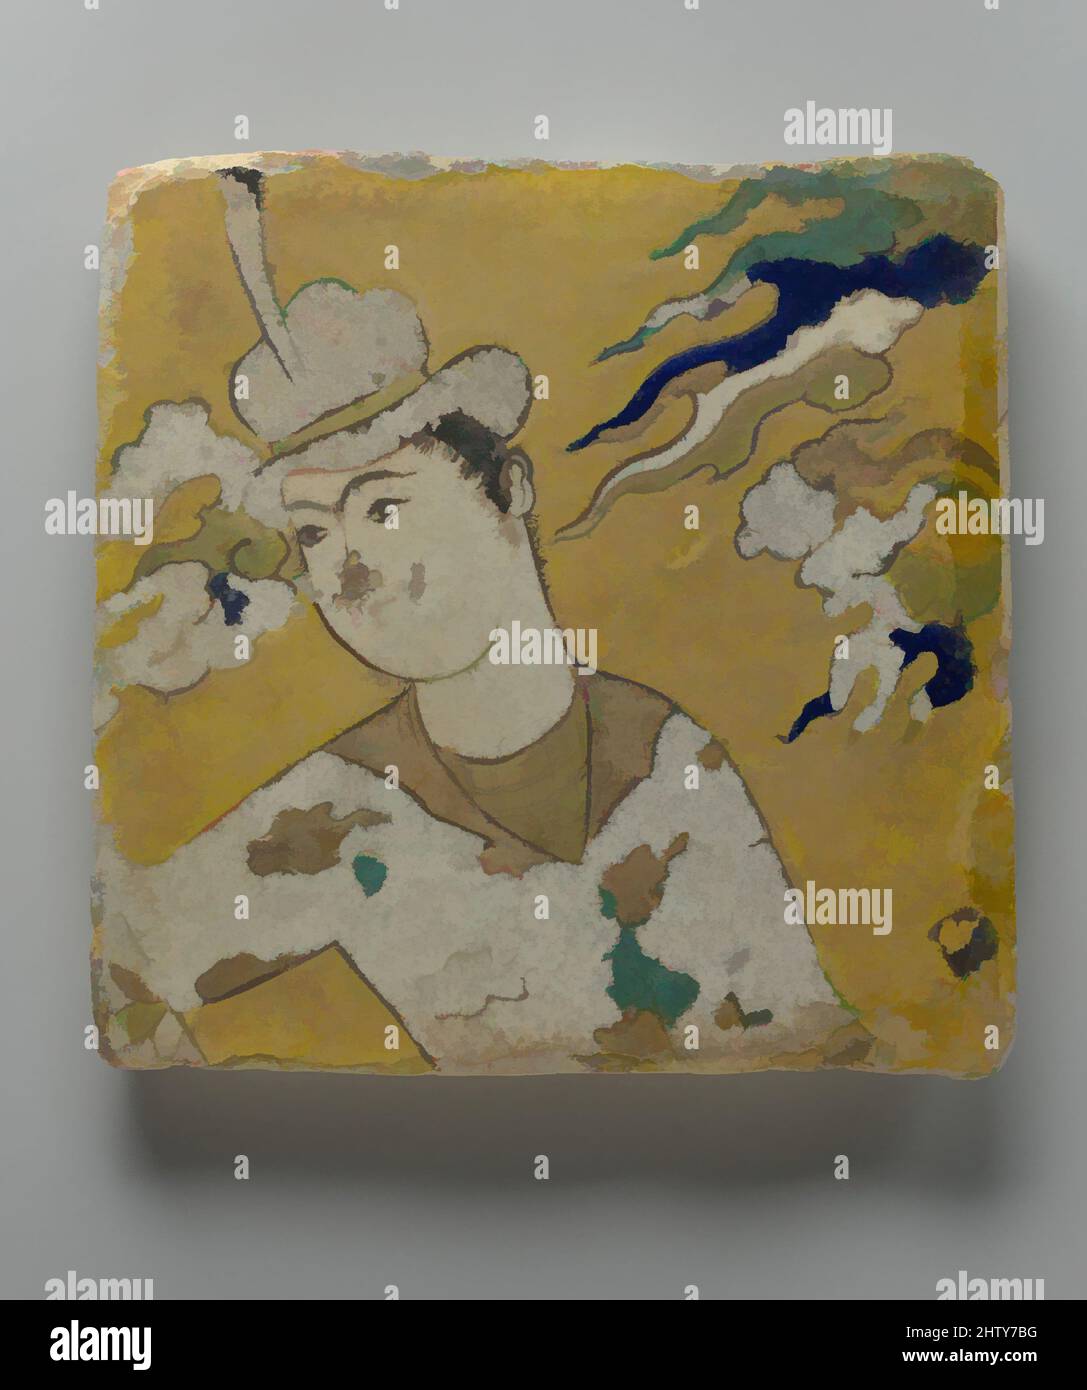 Art inspired by Tile, second half 17th century, Attributed to Iran, Stonepaste; polychrome glaze within black wax resist outlines (cuerda seca technique), H. 8 5/8 in. (21.8 cm), Ceramics-Tiles, This tile, depicting a male youth with delicate features, would originally have been part, Classic works modernized by Artotop with a splash of modernity. Shapes, color and value, eye-catching visual impact on art. Emotions through freedom of artworks in a contemporary way. A timeless message pursuing a wildly creative new direction. Artists turning to the digital medium and creating the Artotop NFT Stock Photo